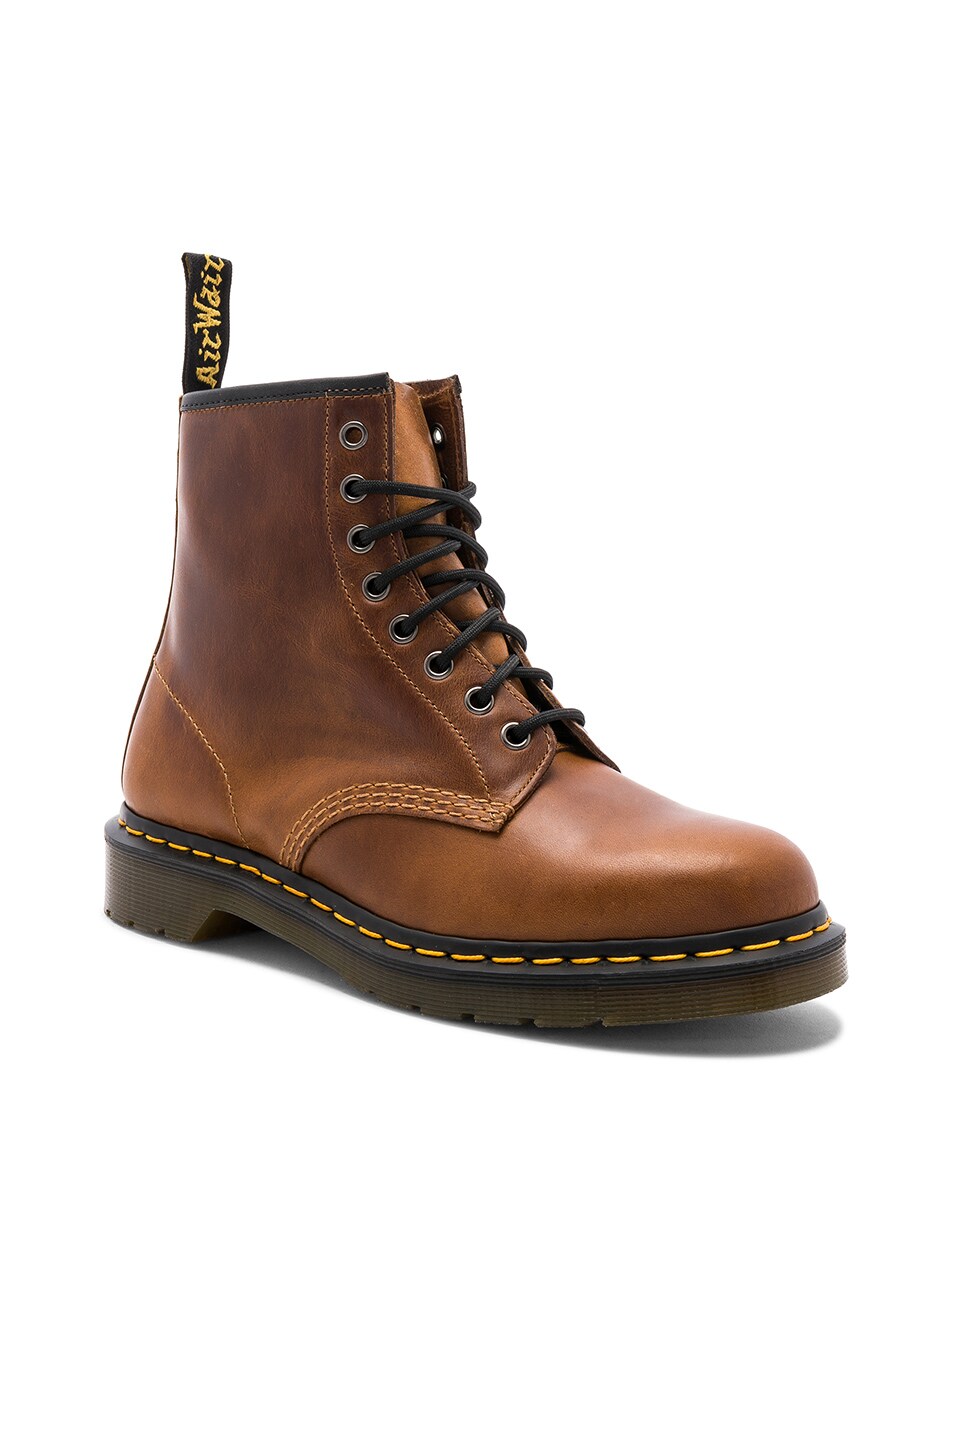 Image 1 of Dr. Martens 1460 8 Eye in Butterscotch